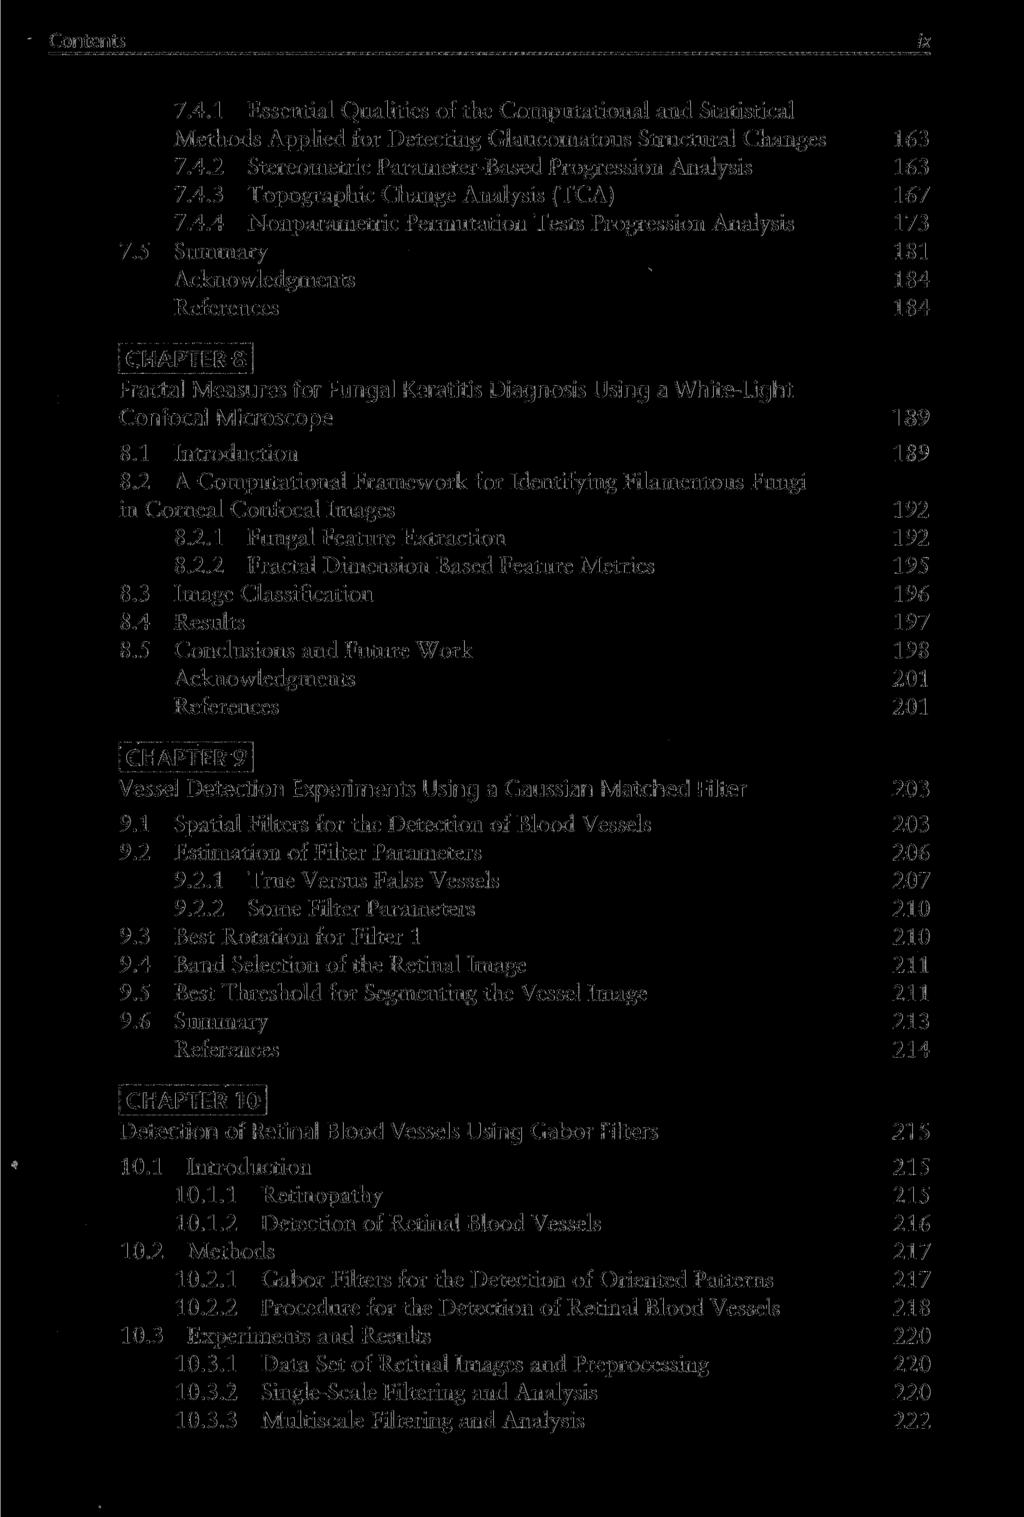 Contents IX 7.4.1 Essential Qualities of the Computational and Statistical Methods Applied for Detecting Glaucomatous Structural Changes 16 7.4.2 Stereometrie Parameter-Based Progression Analysis 16 7.